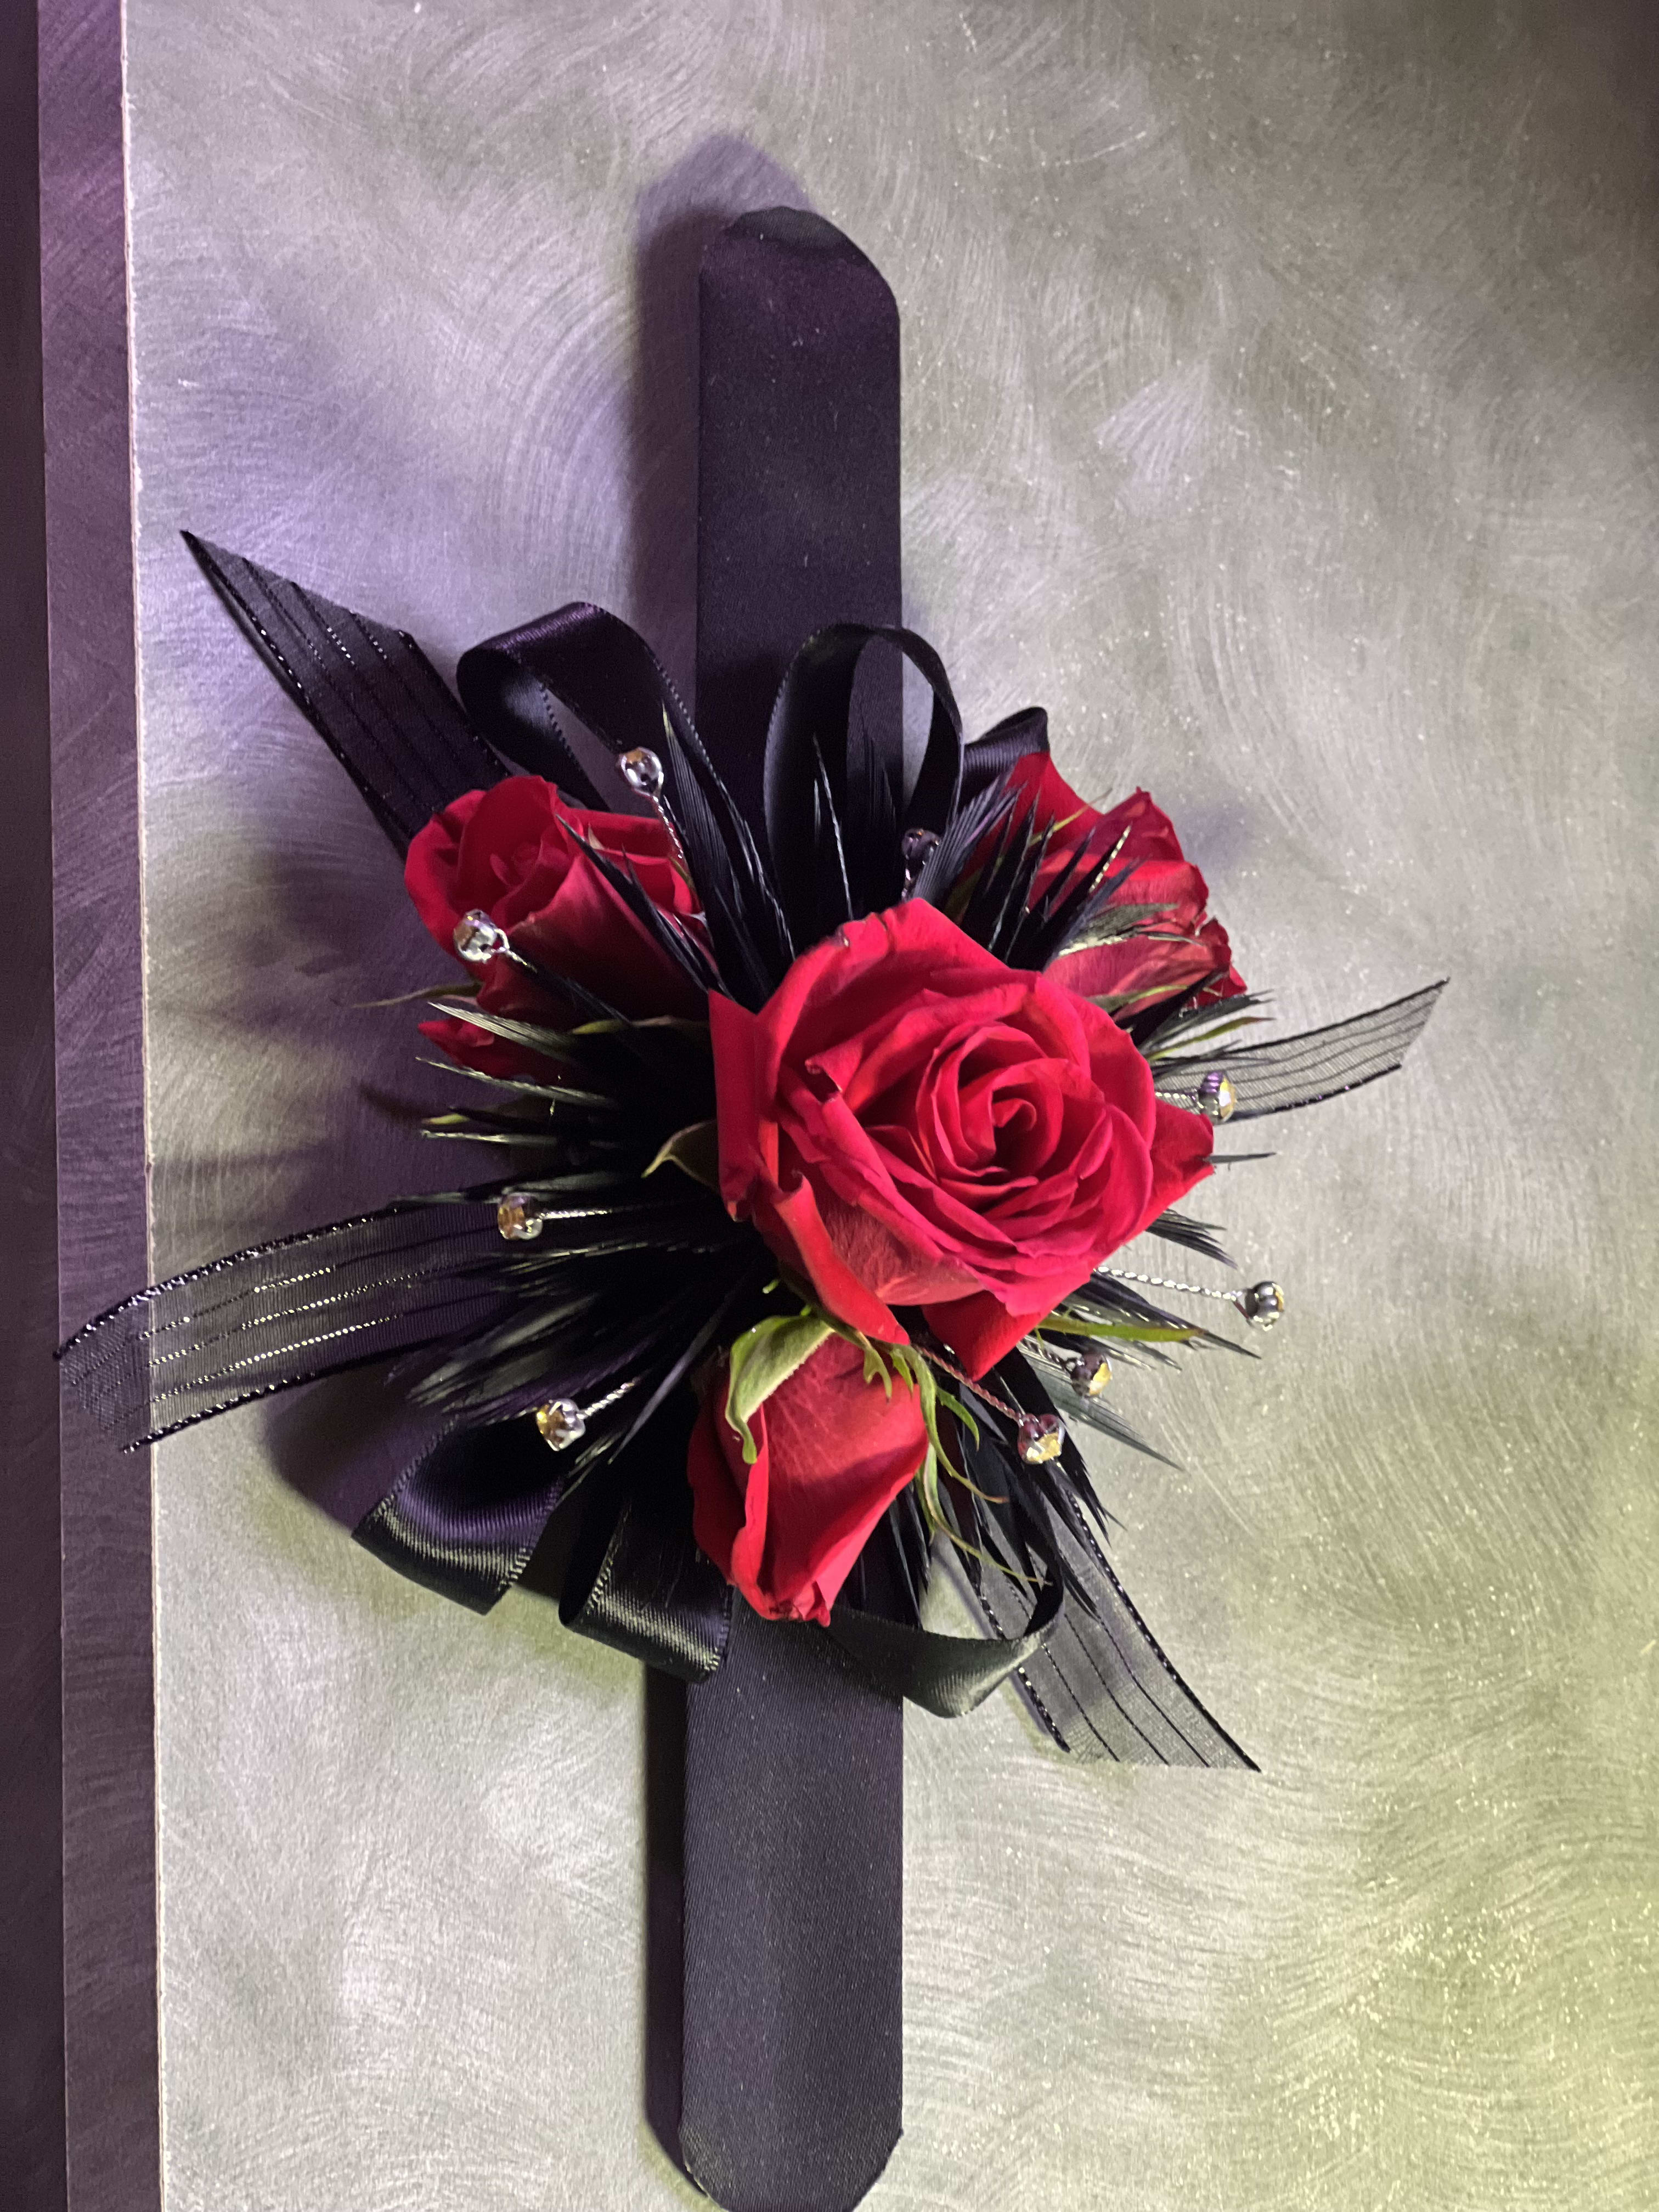 Black Prom Corsage - Just in time for Prom Season, Our Black Prom (or homecoming) Corsage. Fitted with rhinestones, black feathers and ribbon on a black slap bracelet.  Comes with spray roses. Custom created with you in mind.